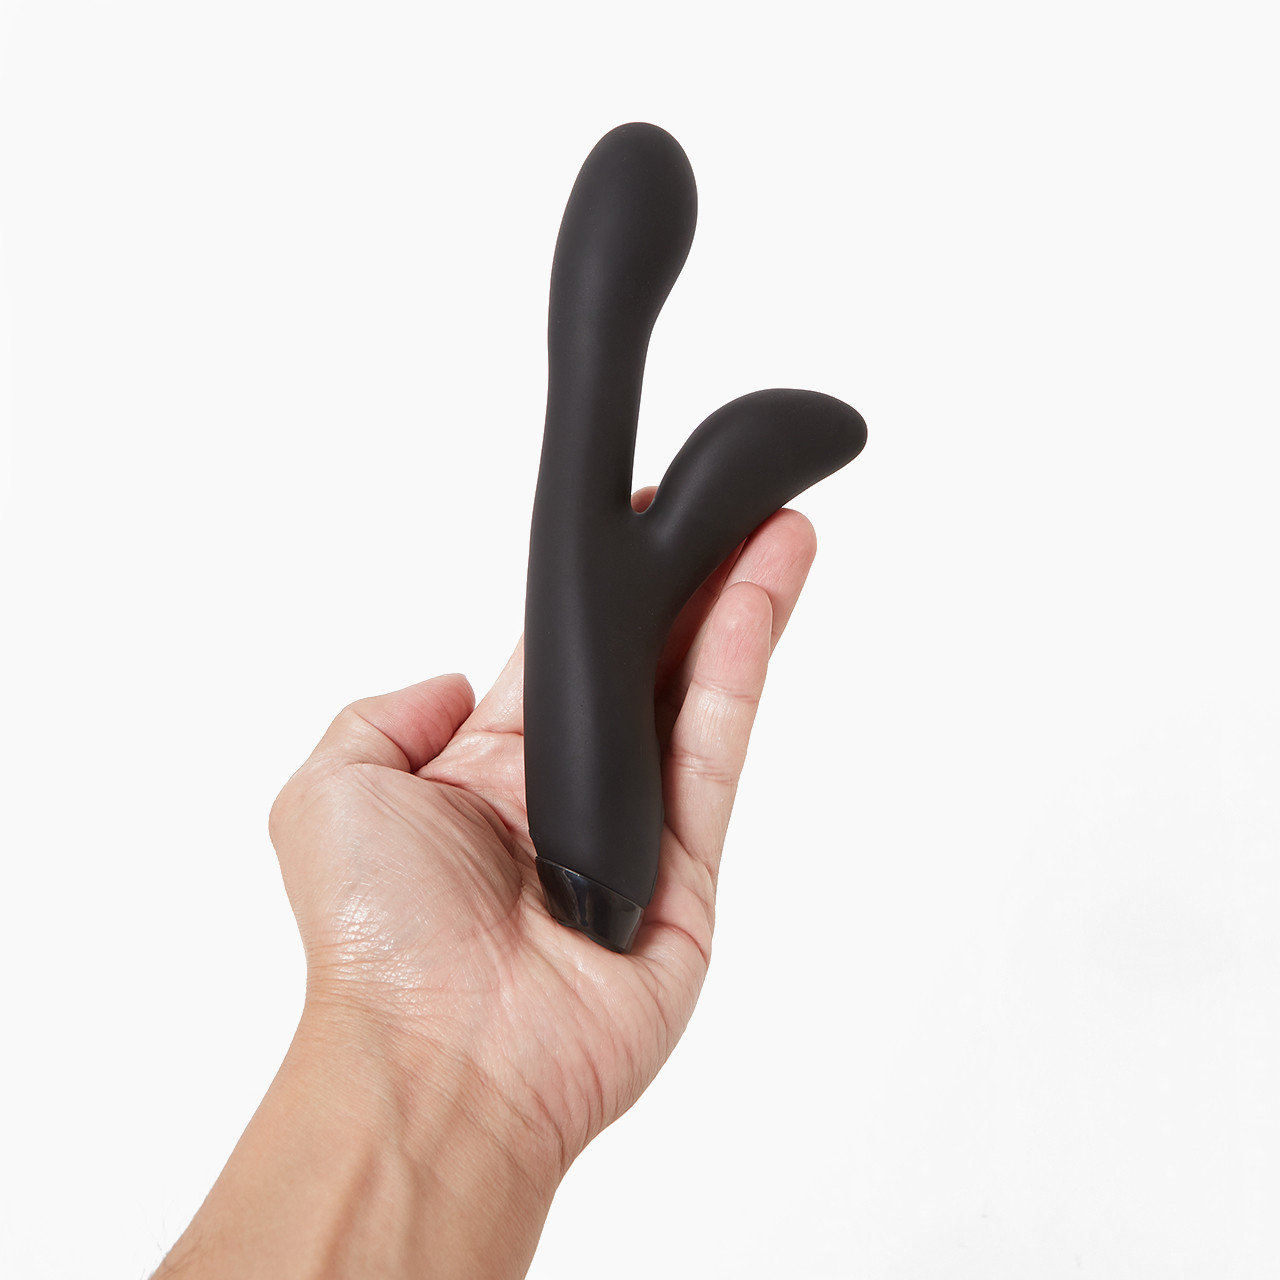 'Je Joue Hera Flex', a black silicone toy with a flexible structure held in a hand